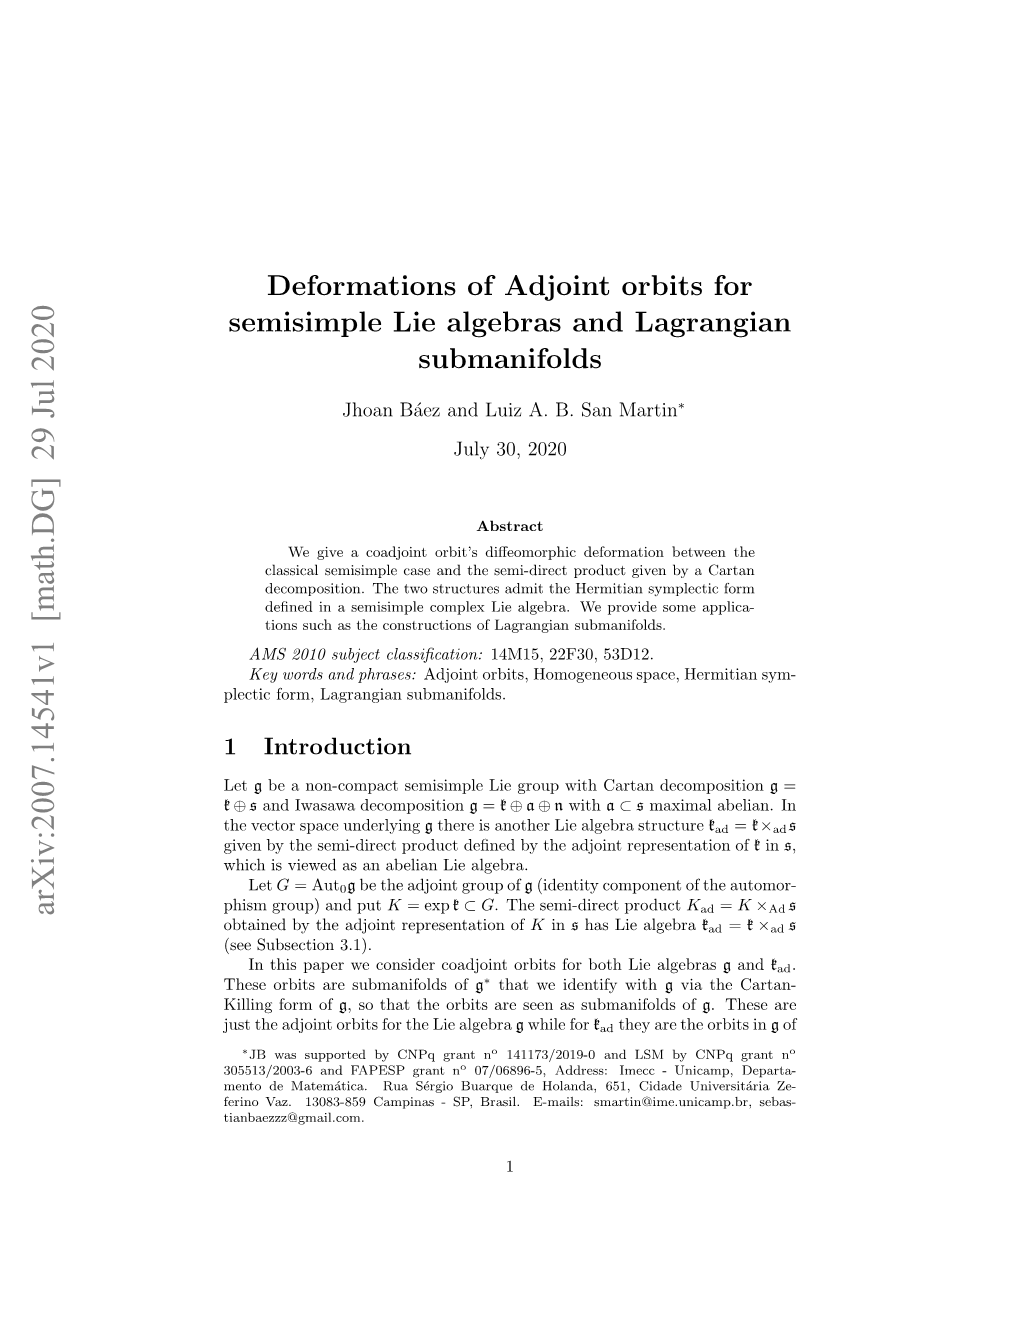 Deformations of Adjoint Orbits for Semisimple Lie Algebras and Lagrangian Submanifolds